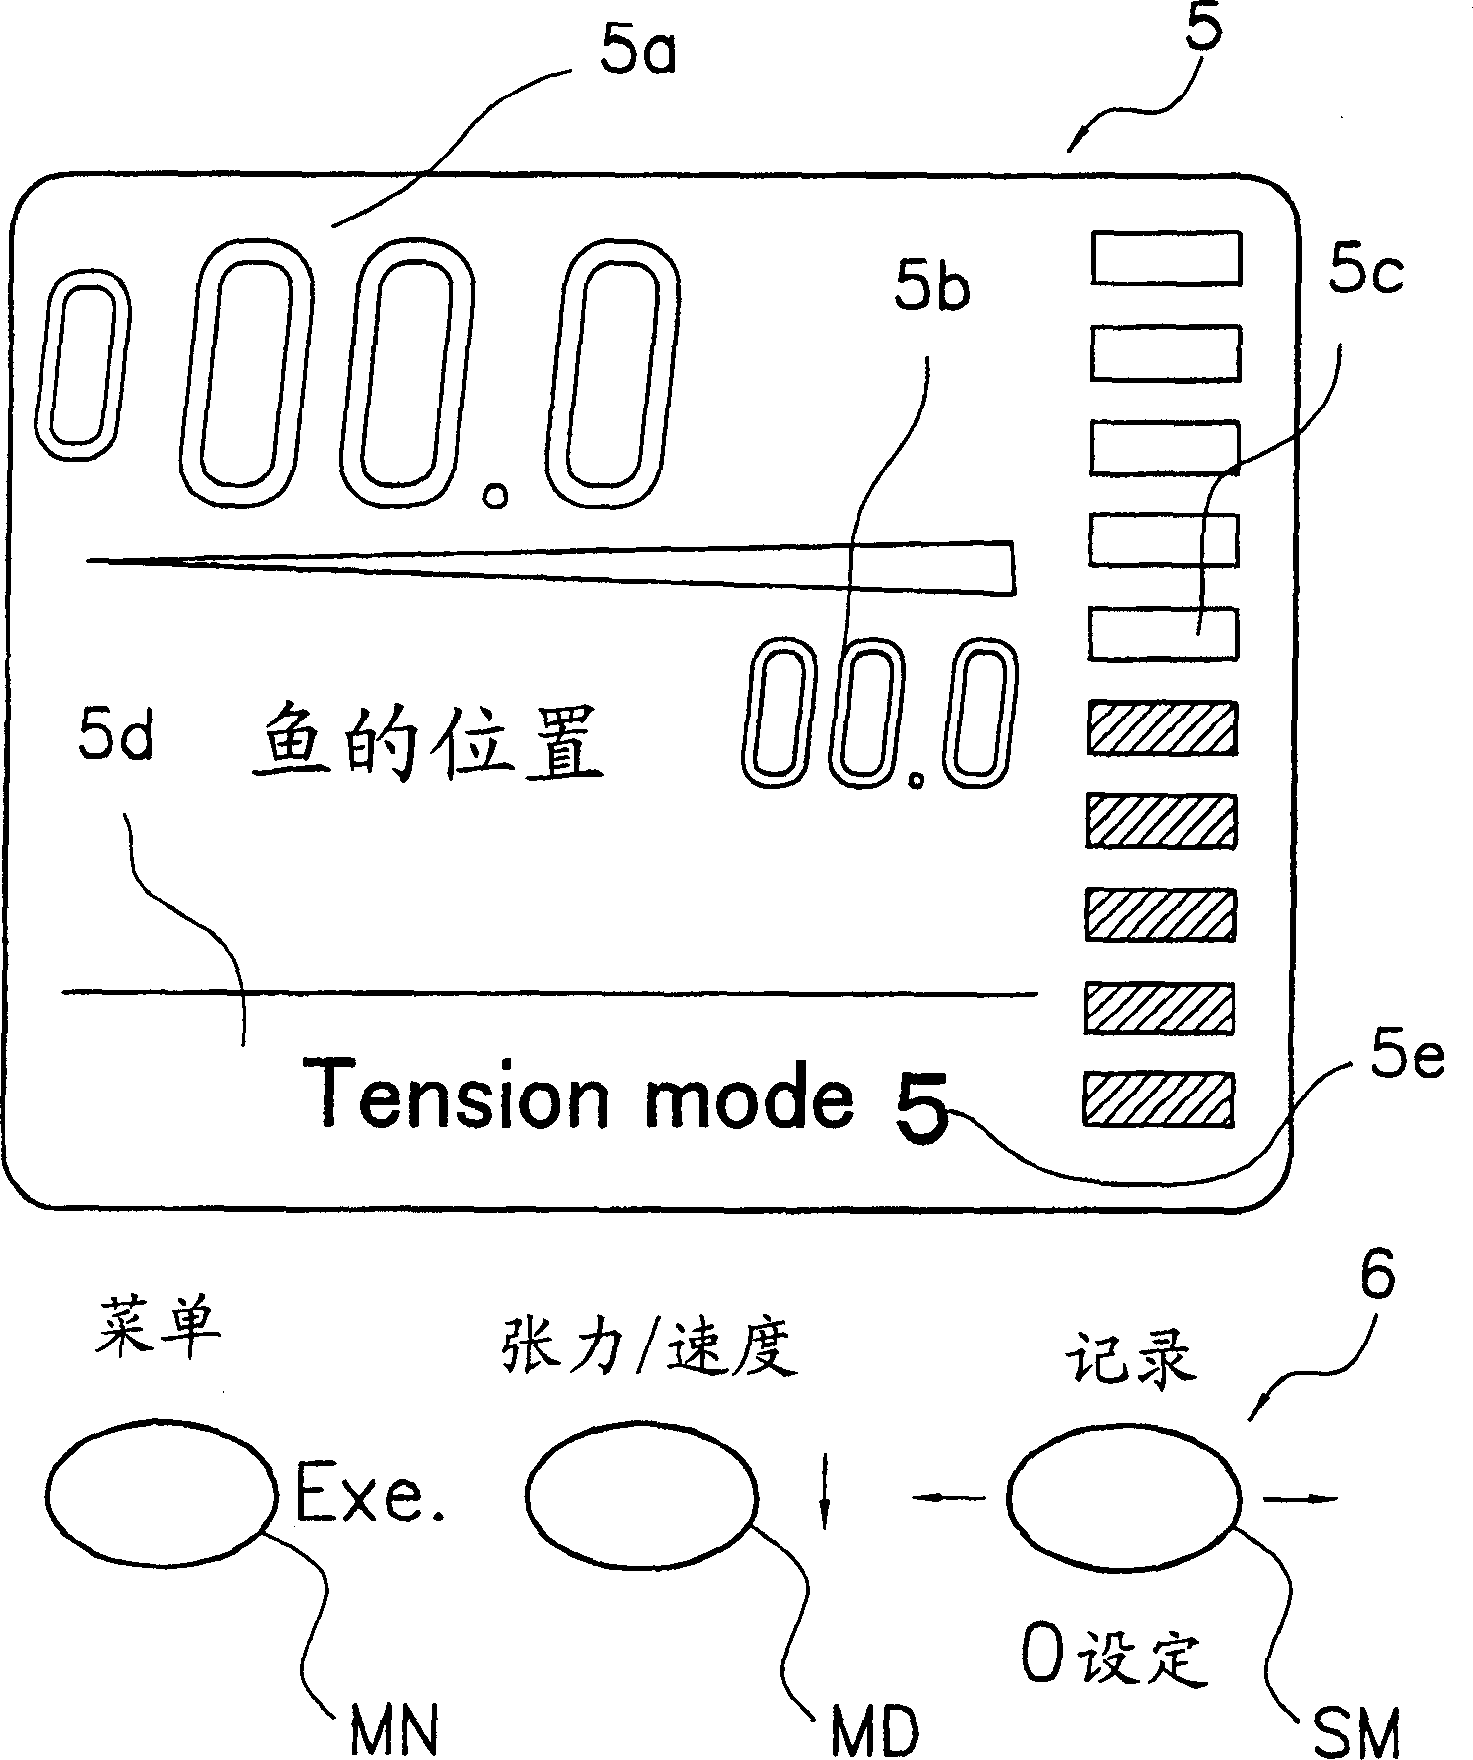 Motor control device for motor driven reel